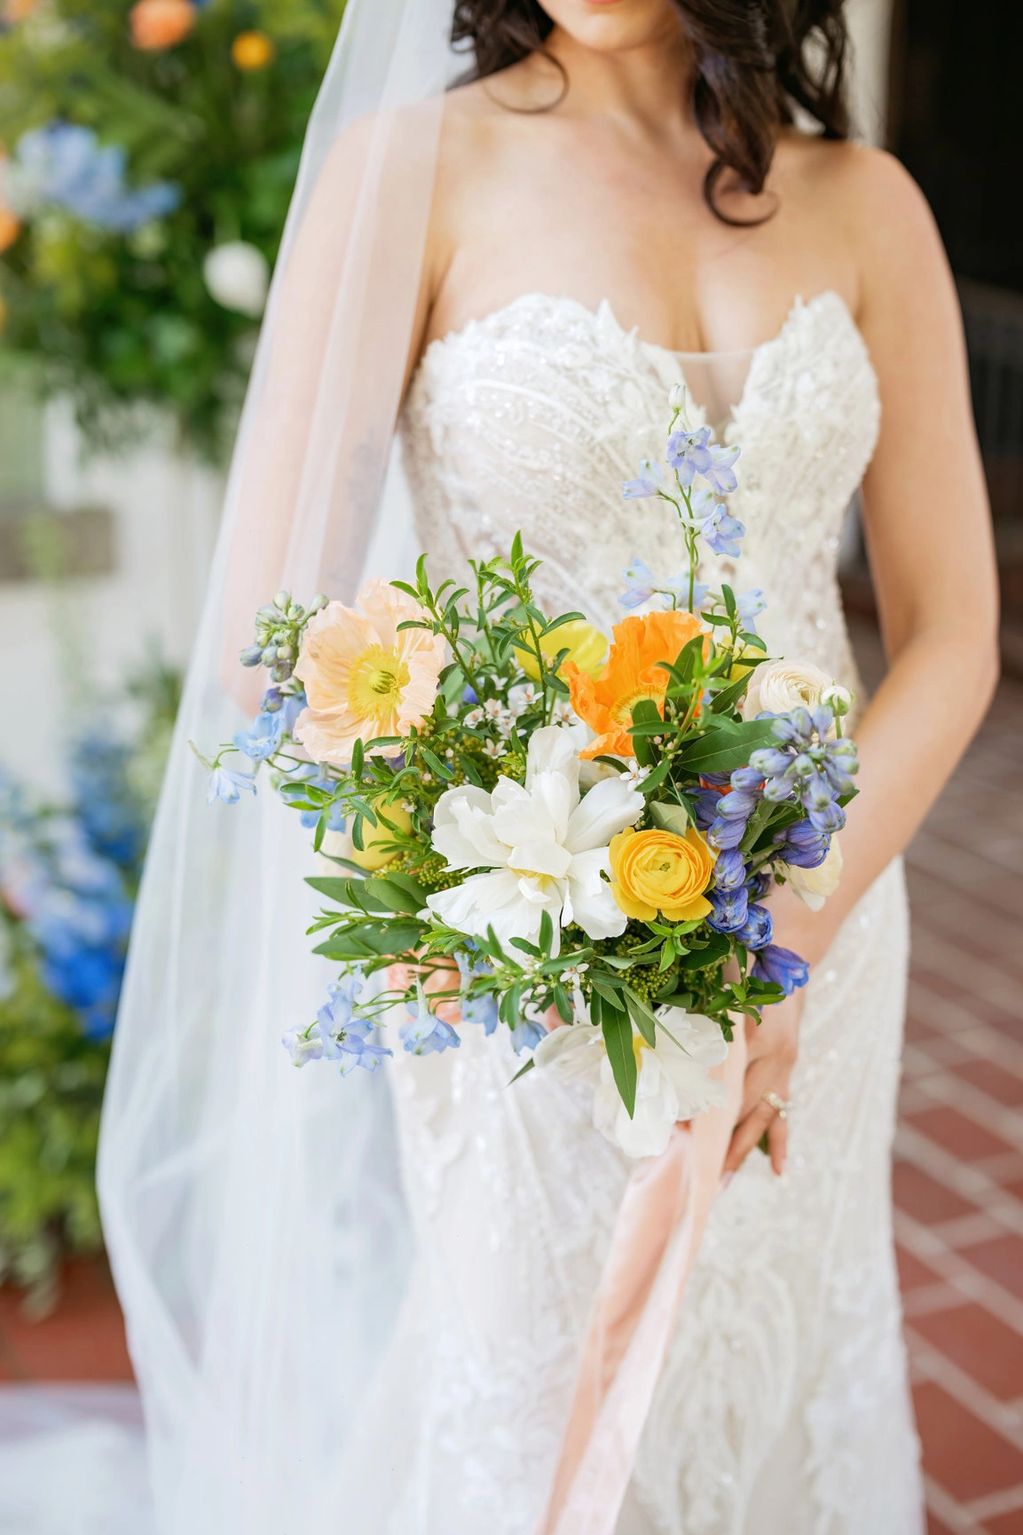 colorful bridal bouqet in front of wedding dress